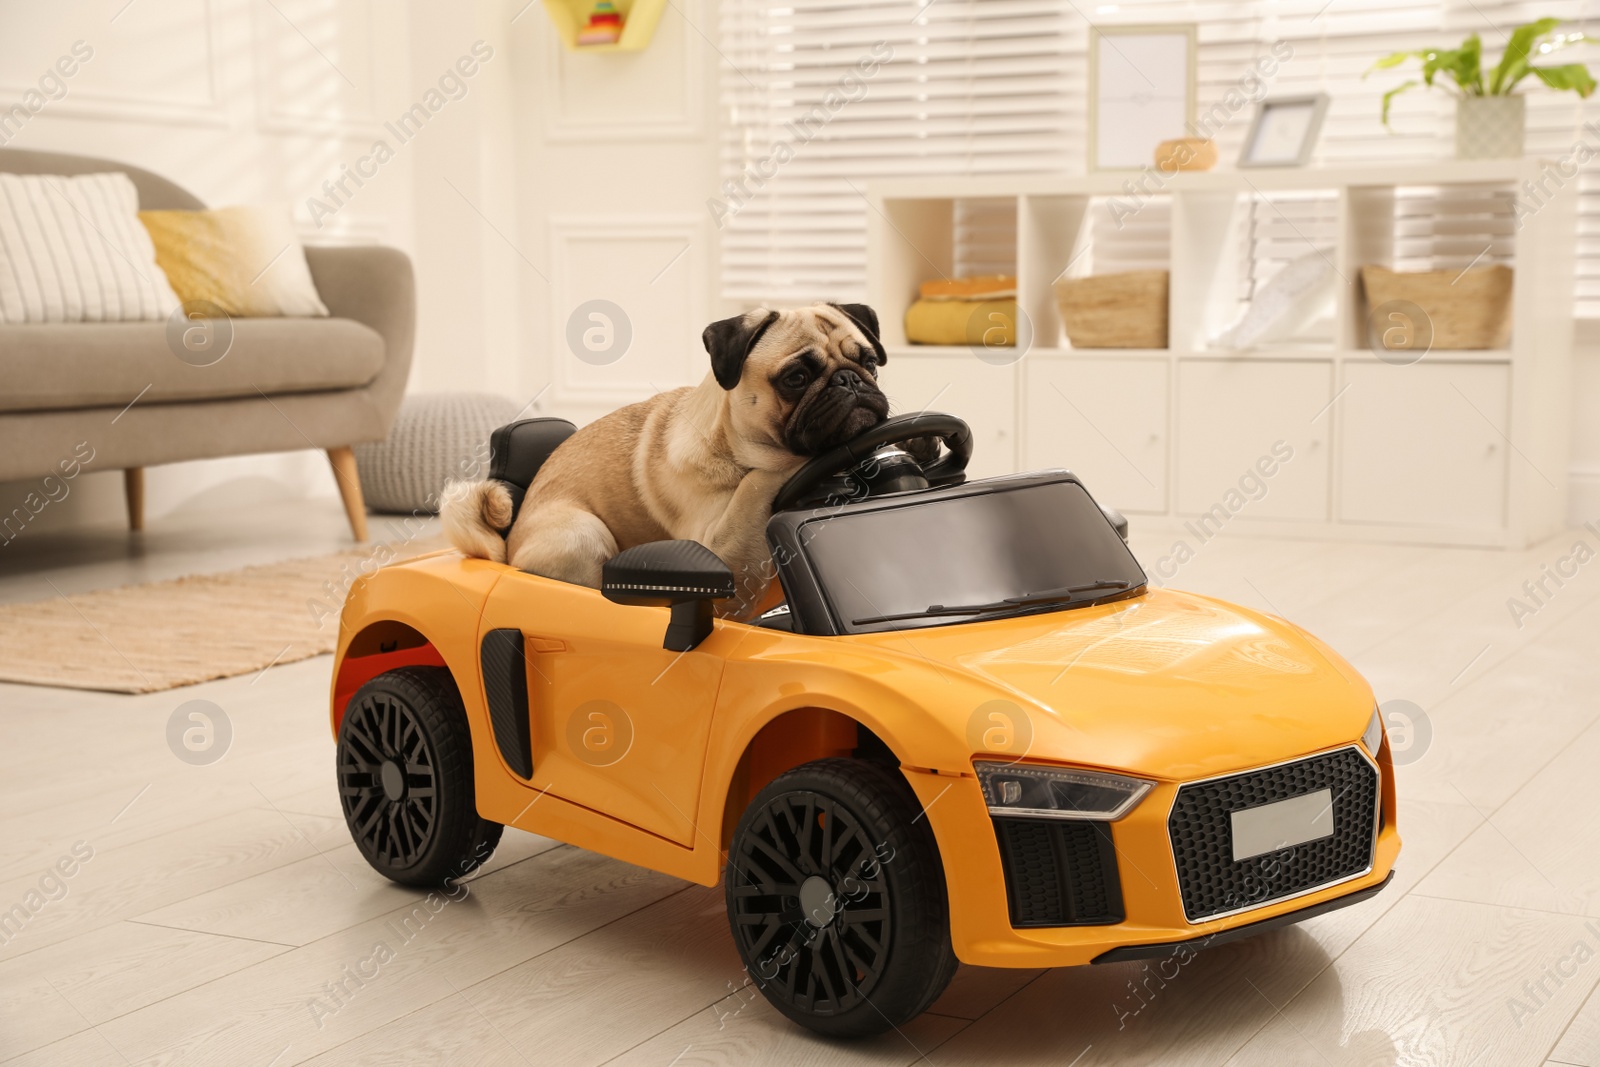 Photo of Adorable pug dog in toy car indoors